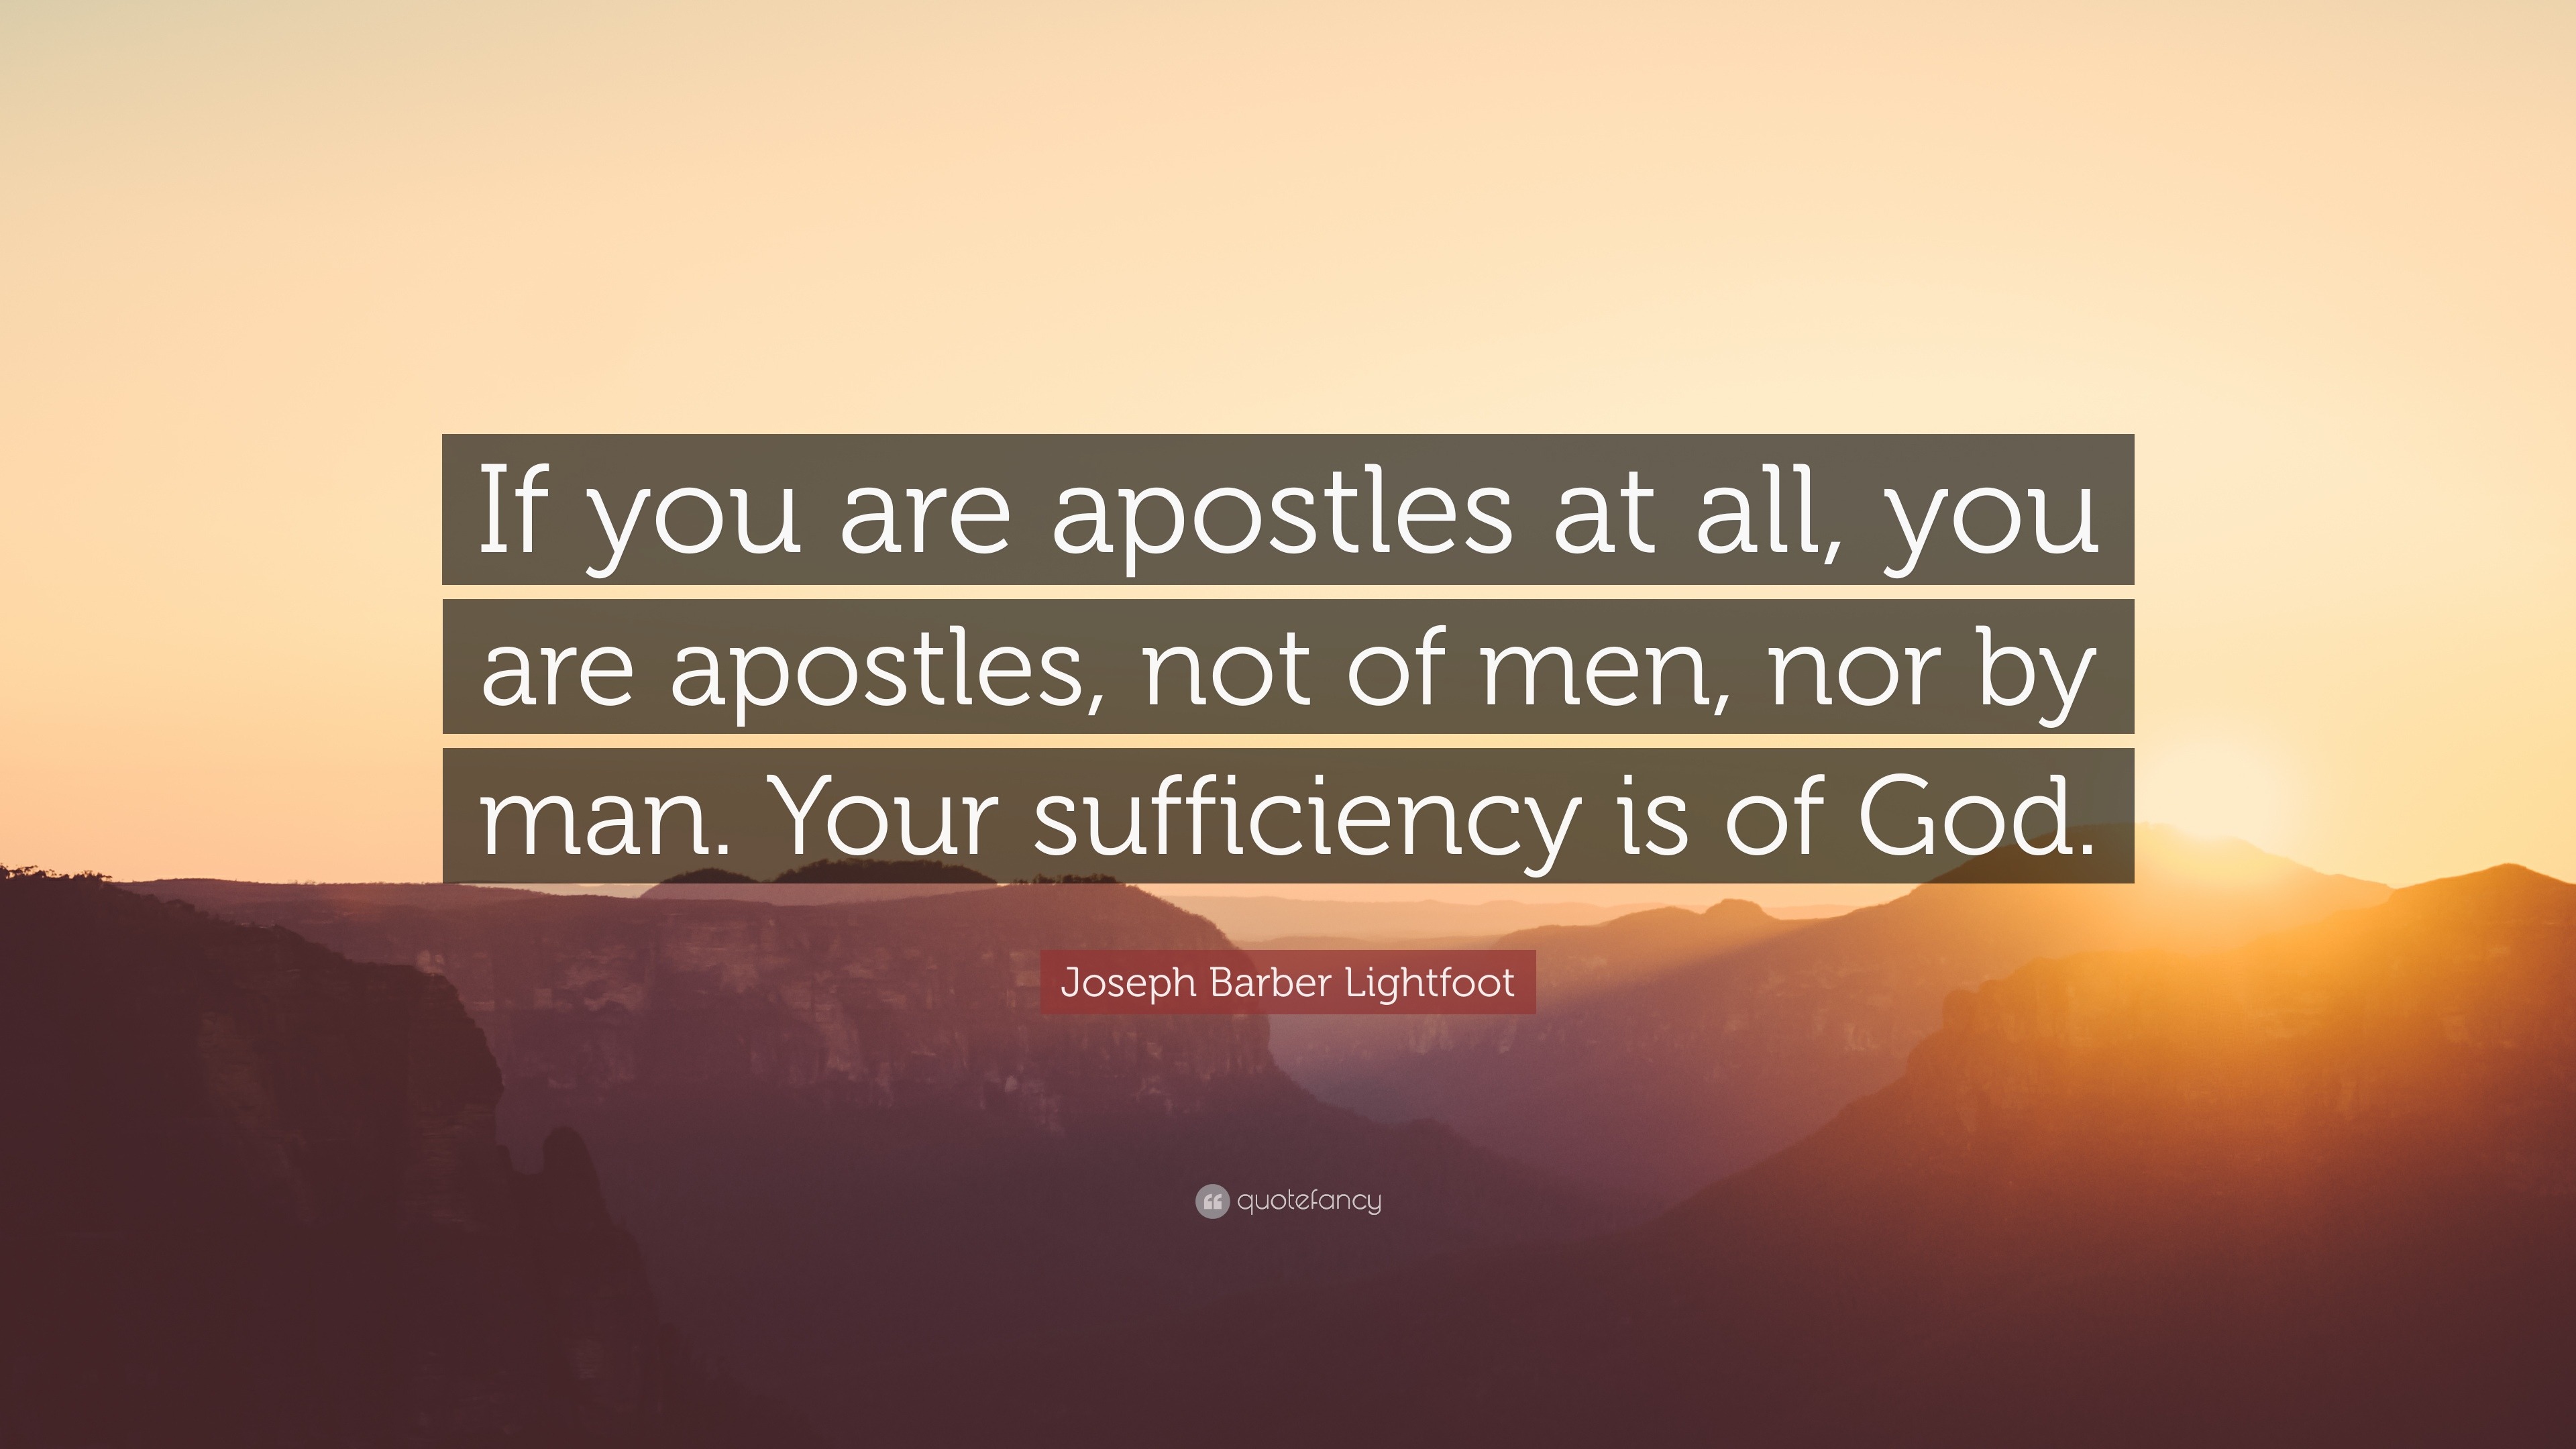 Joseph Barber Lightfoot Quote: “If you are apostles at all, you are ...